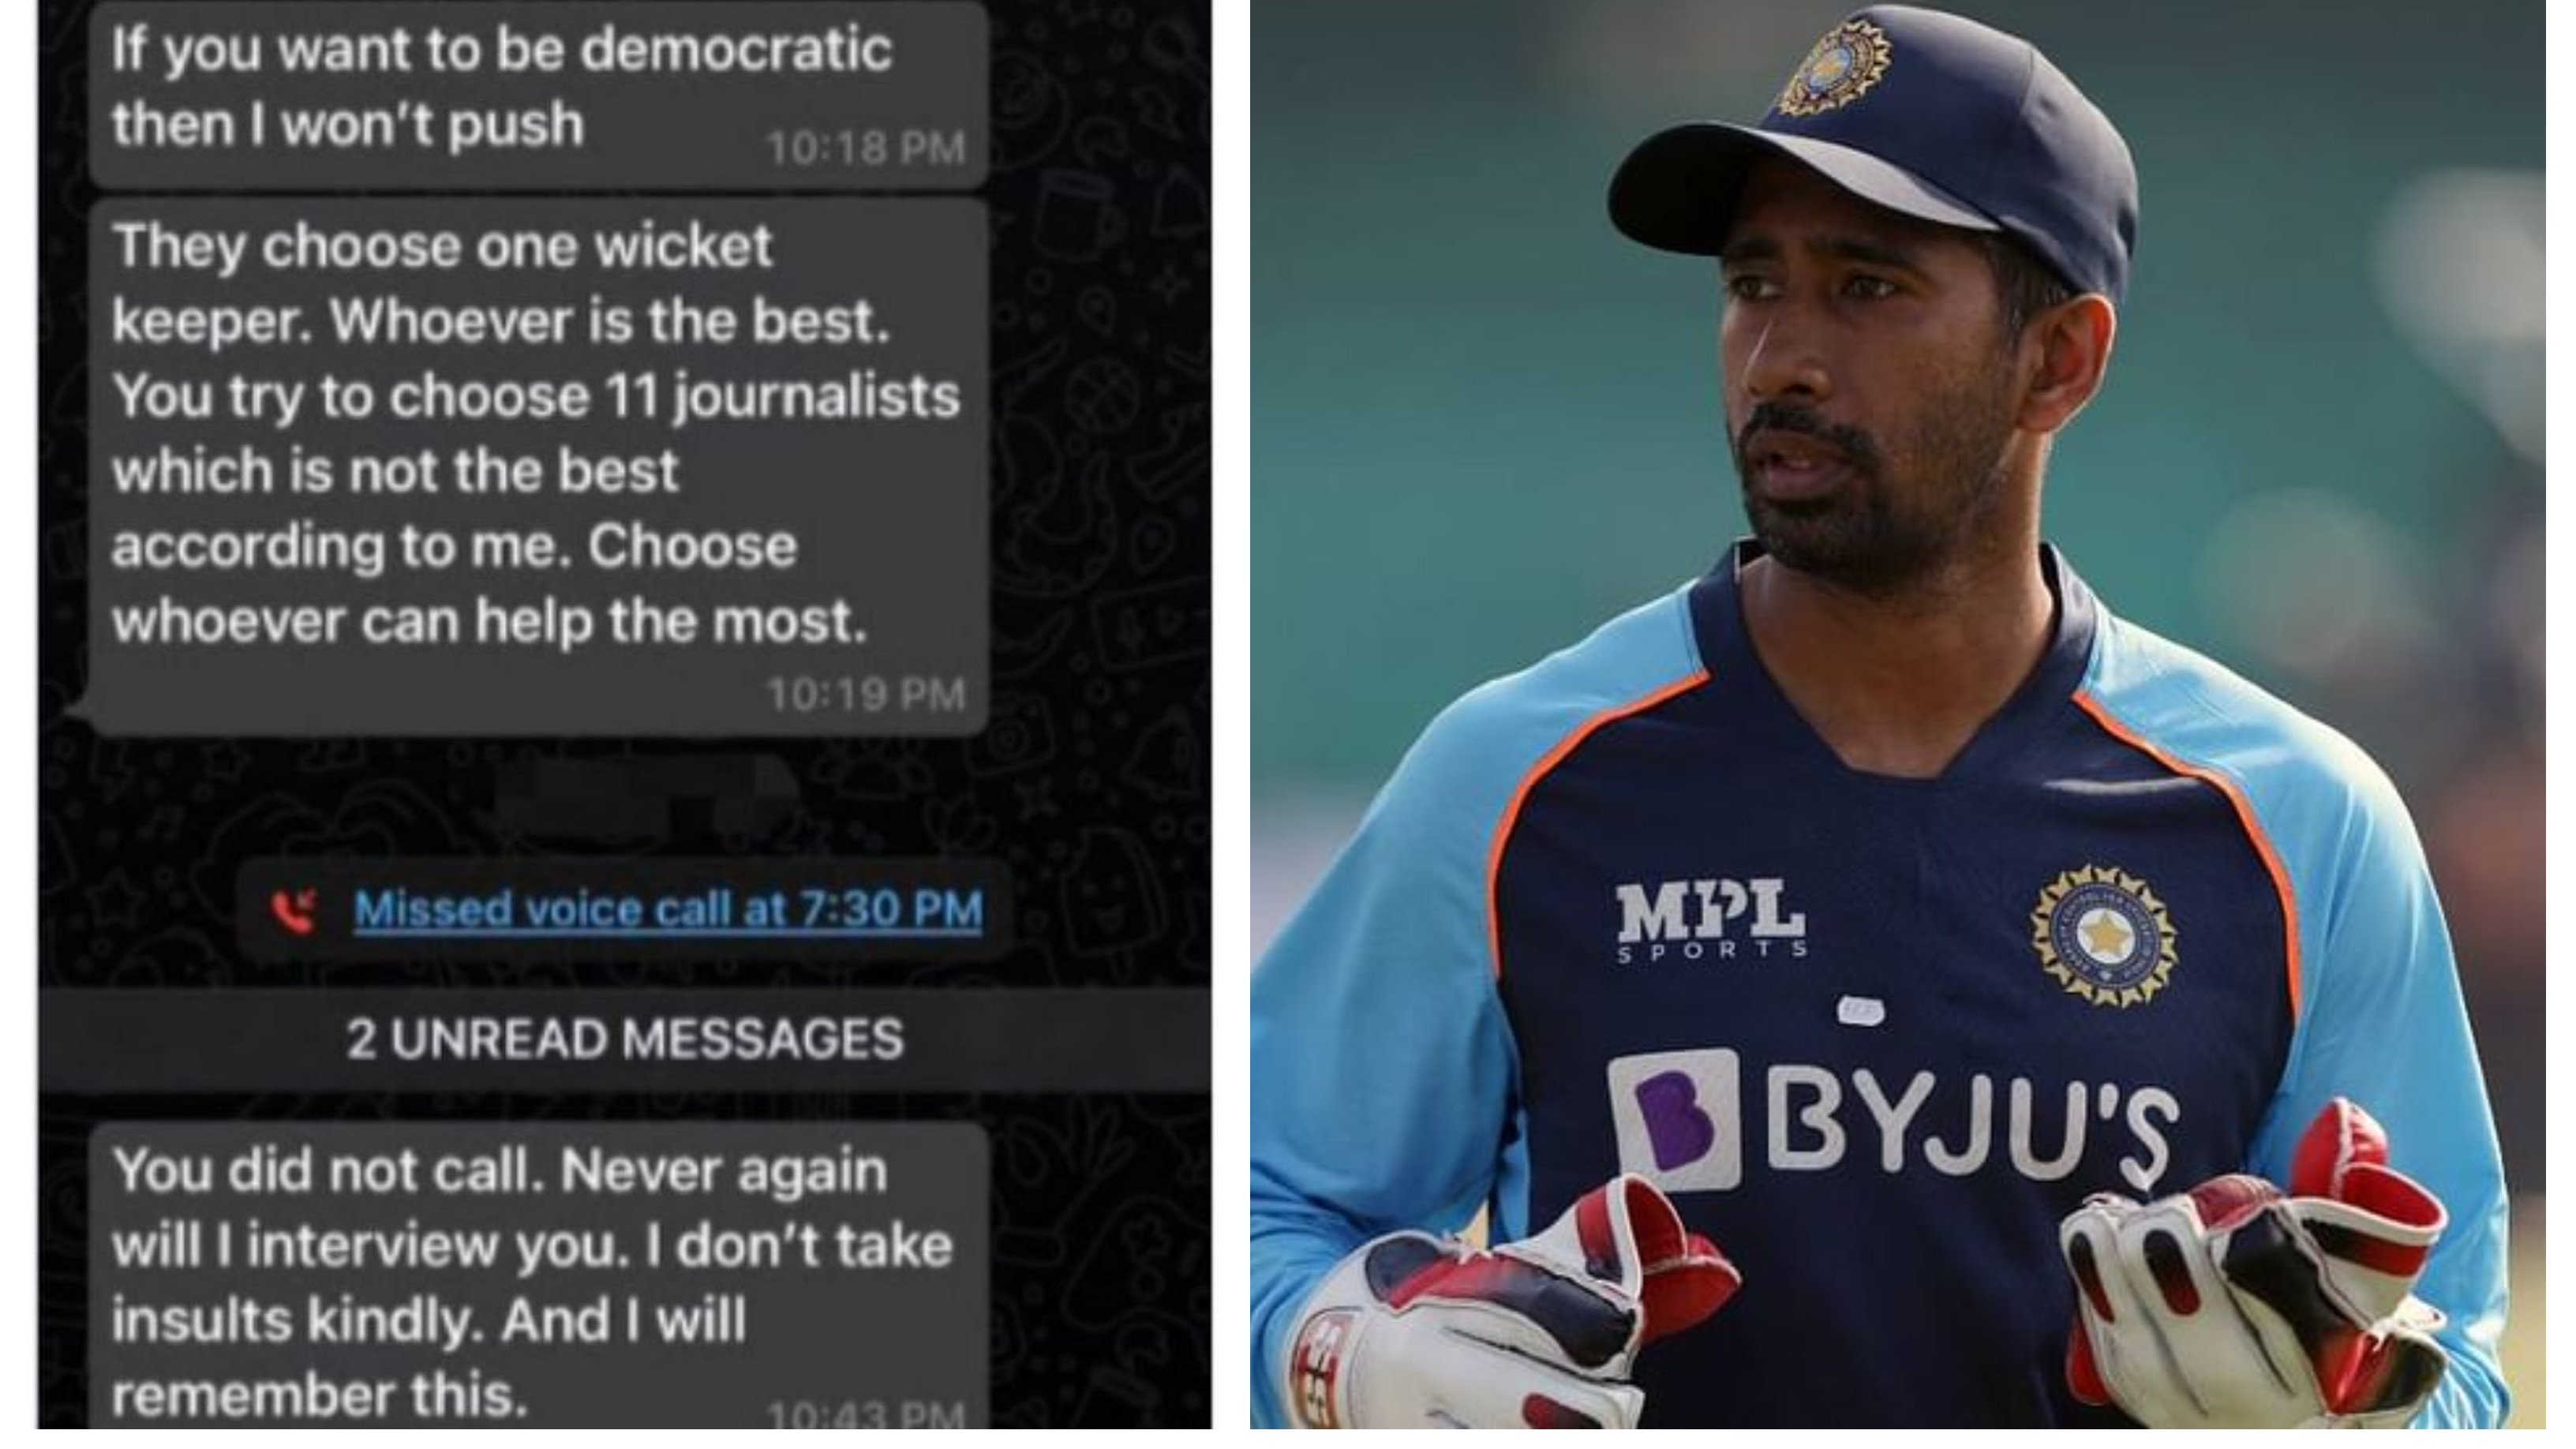 ‘If any such repetition happens, I will not hold back’, Wriddhiman Saha warns journalist who threatened him